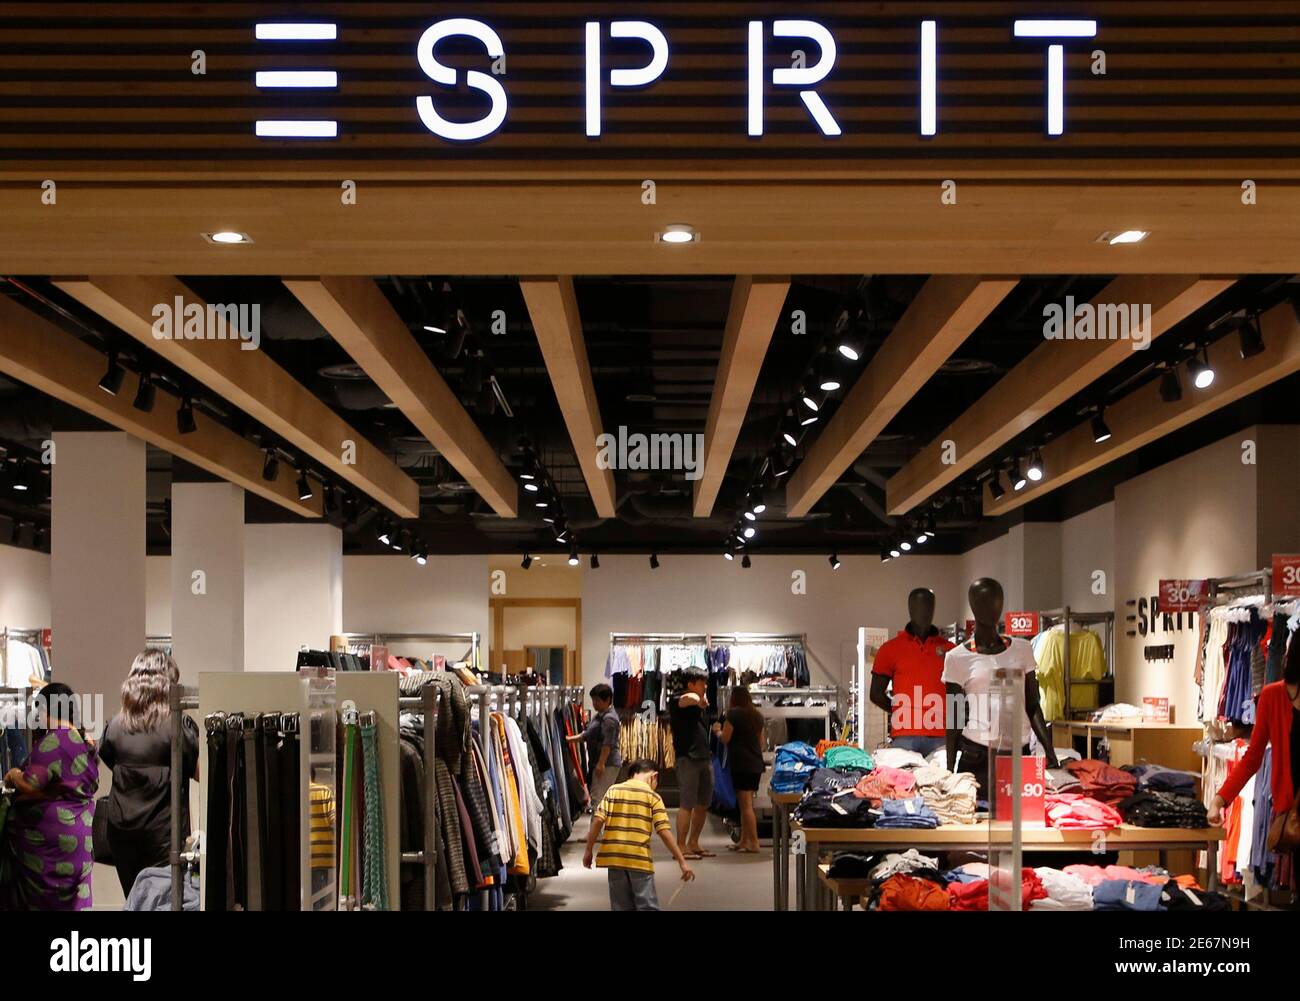 People shop at an Esprit Outlet store in September 10, 2013. Clothing retailer Esprit Holdings Ltd posted on Tuesday a deeper-than-expected net loss for fiscal 2013, weighed down by weakness in